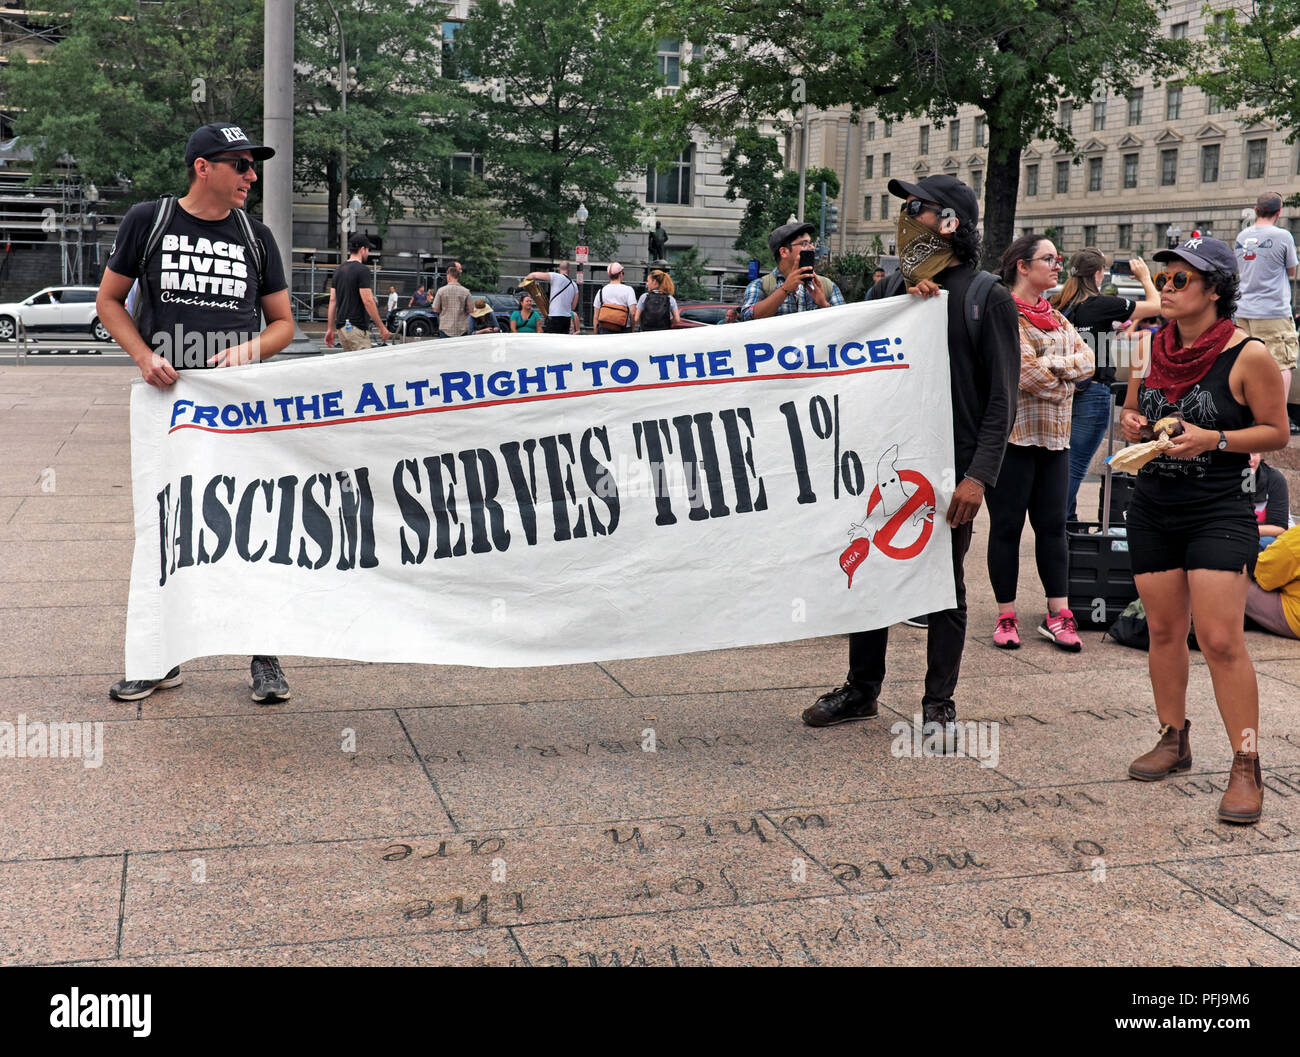 'Fascism Serves the 1%' sign is unfurled in Freedom Park in Washington D.C. during the 'Unite the Right 2' counterprotest prior to their march Stock Photo